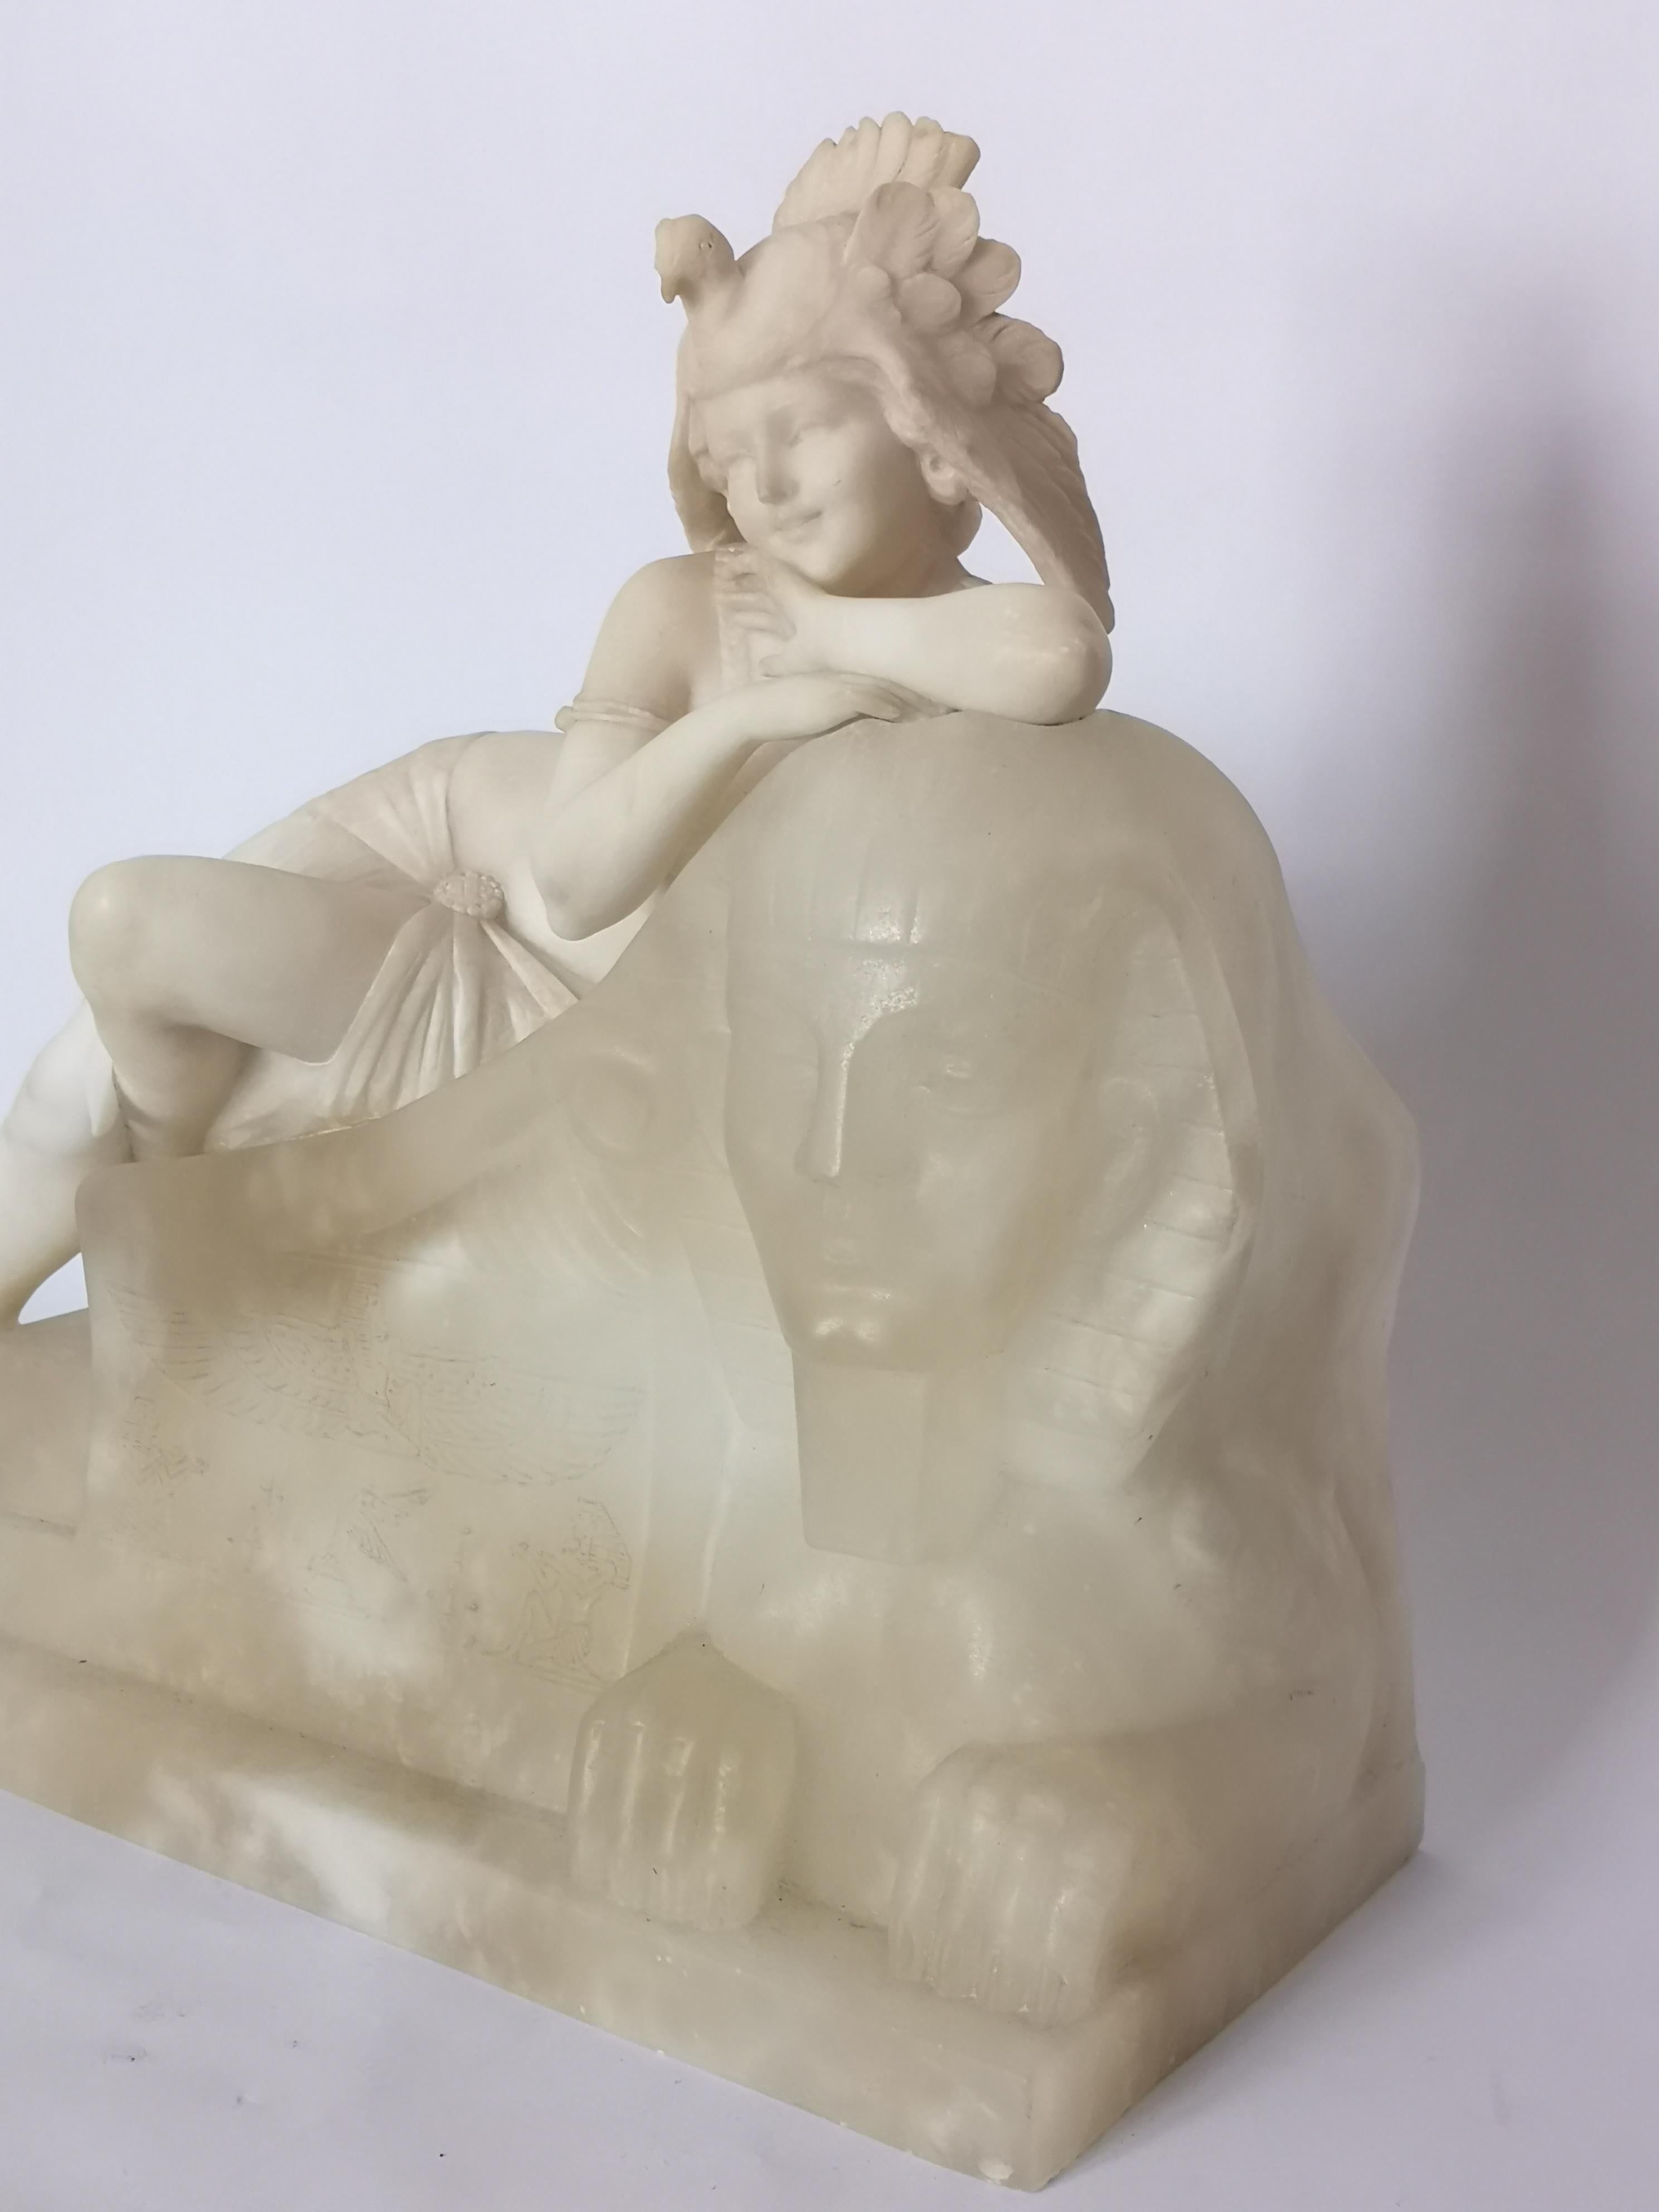 This fantasy sculpture of an art deco lady is fashioning a hat in the form of a bird and resting on a Sphinx. Inside the Sphinx is a light bulb which illuminates the hyroglifics.
Signed 'A Saccard'
French, circa 1930.